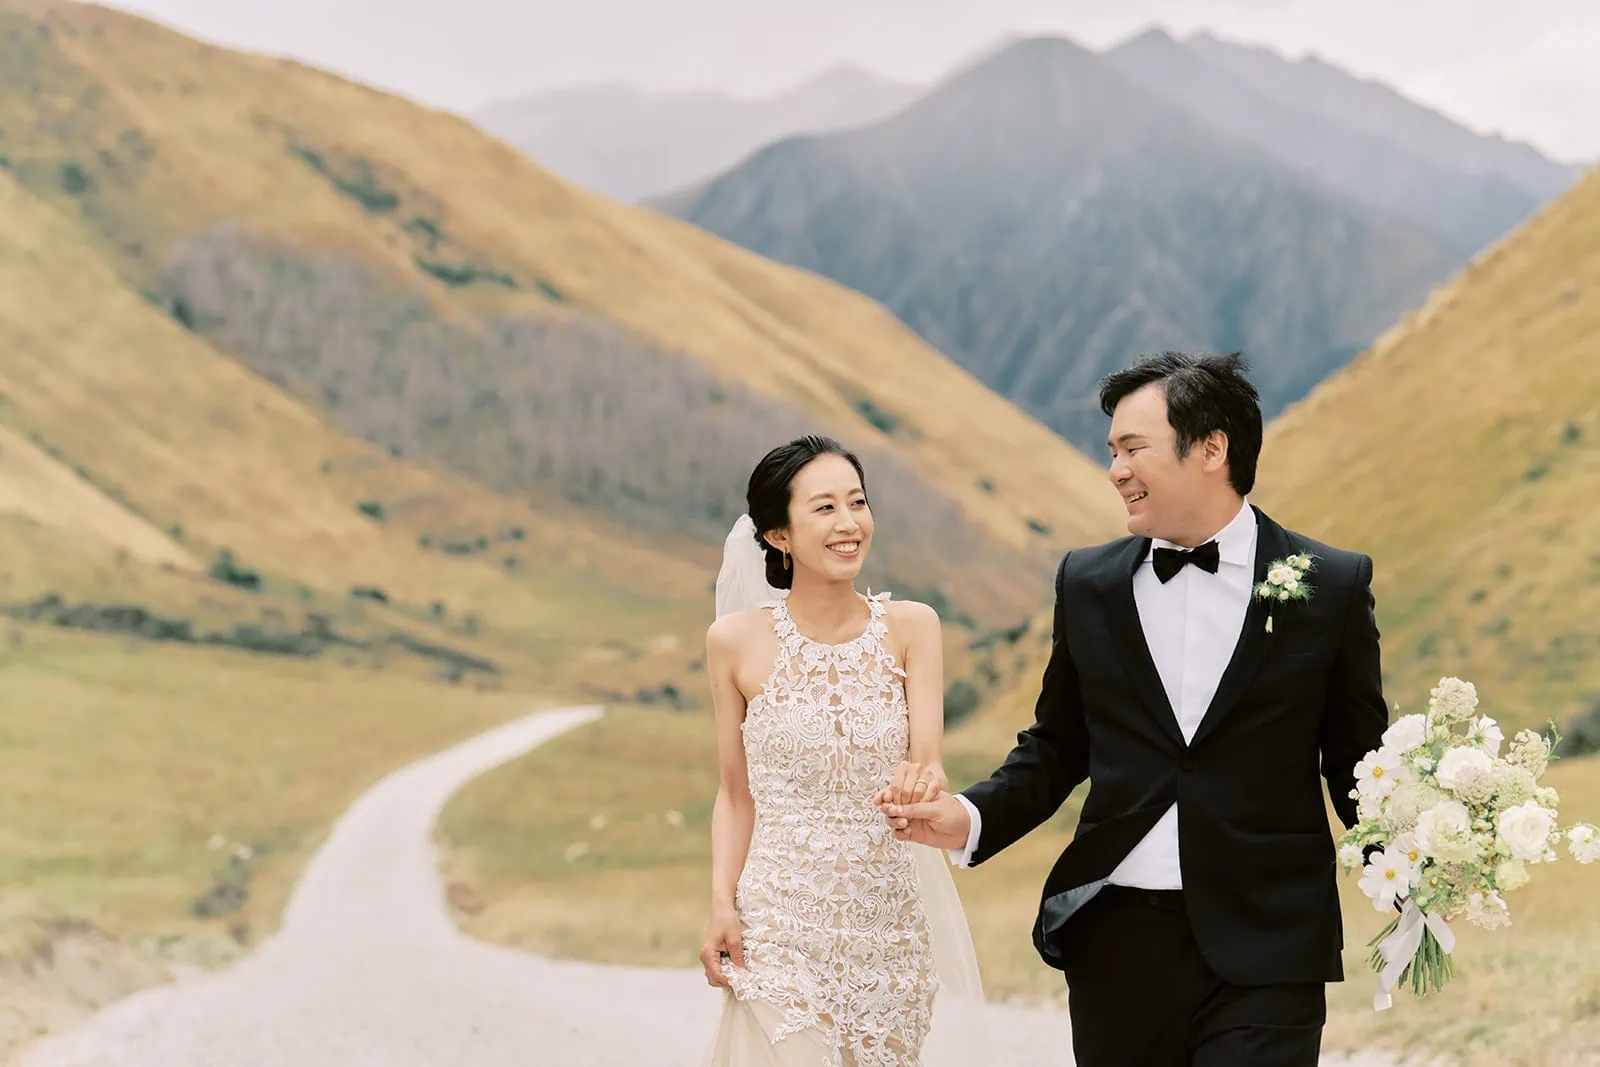 Kyoto Tokyo Japan Elopement Wedding Photographer, Planner & Videographer | A couple in wedding attire walking hand in hand along a countryside path with mountains in the background, captured by a renowned Japan Wedding Photographer.